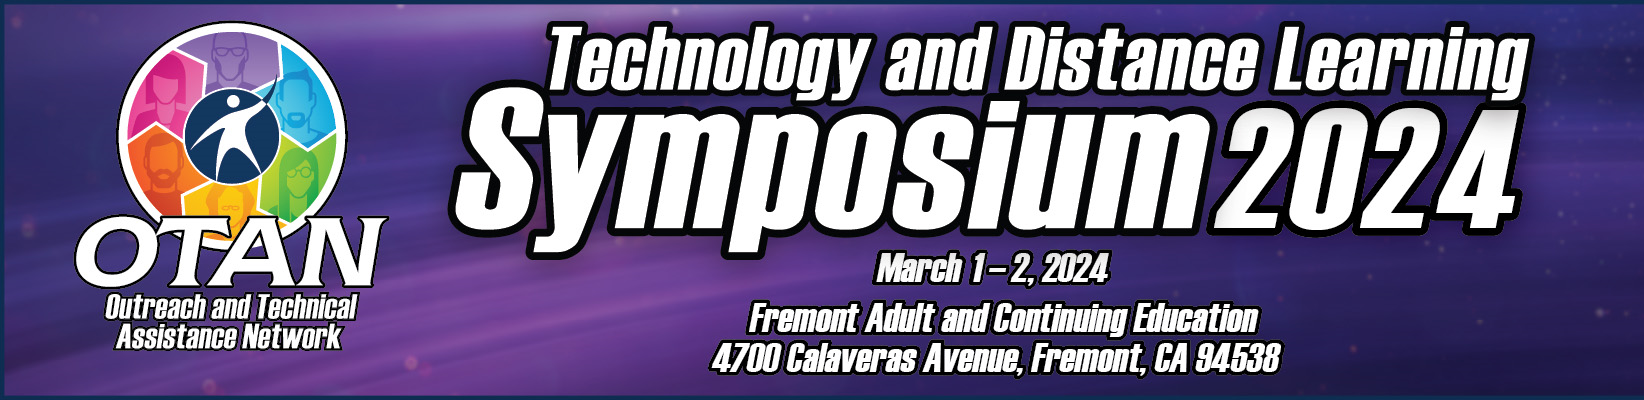 Technology and Distance Learning Symposium 2024 Banner